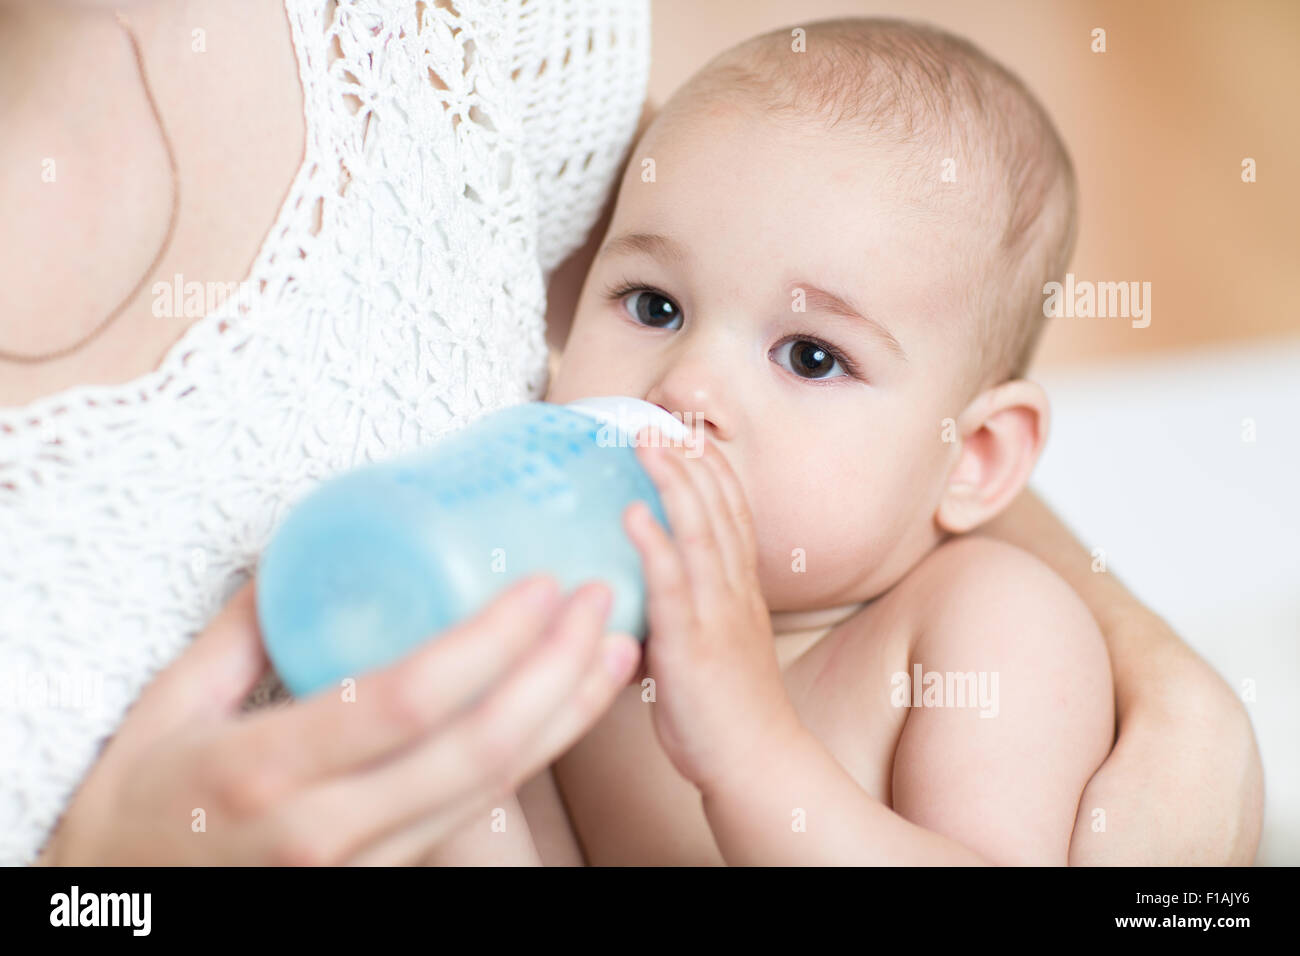 mother feeds baby milk from bottle Stock Photo